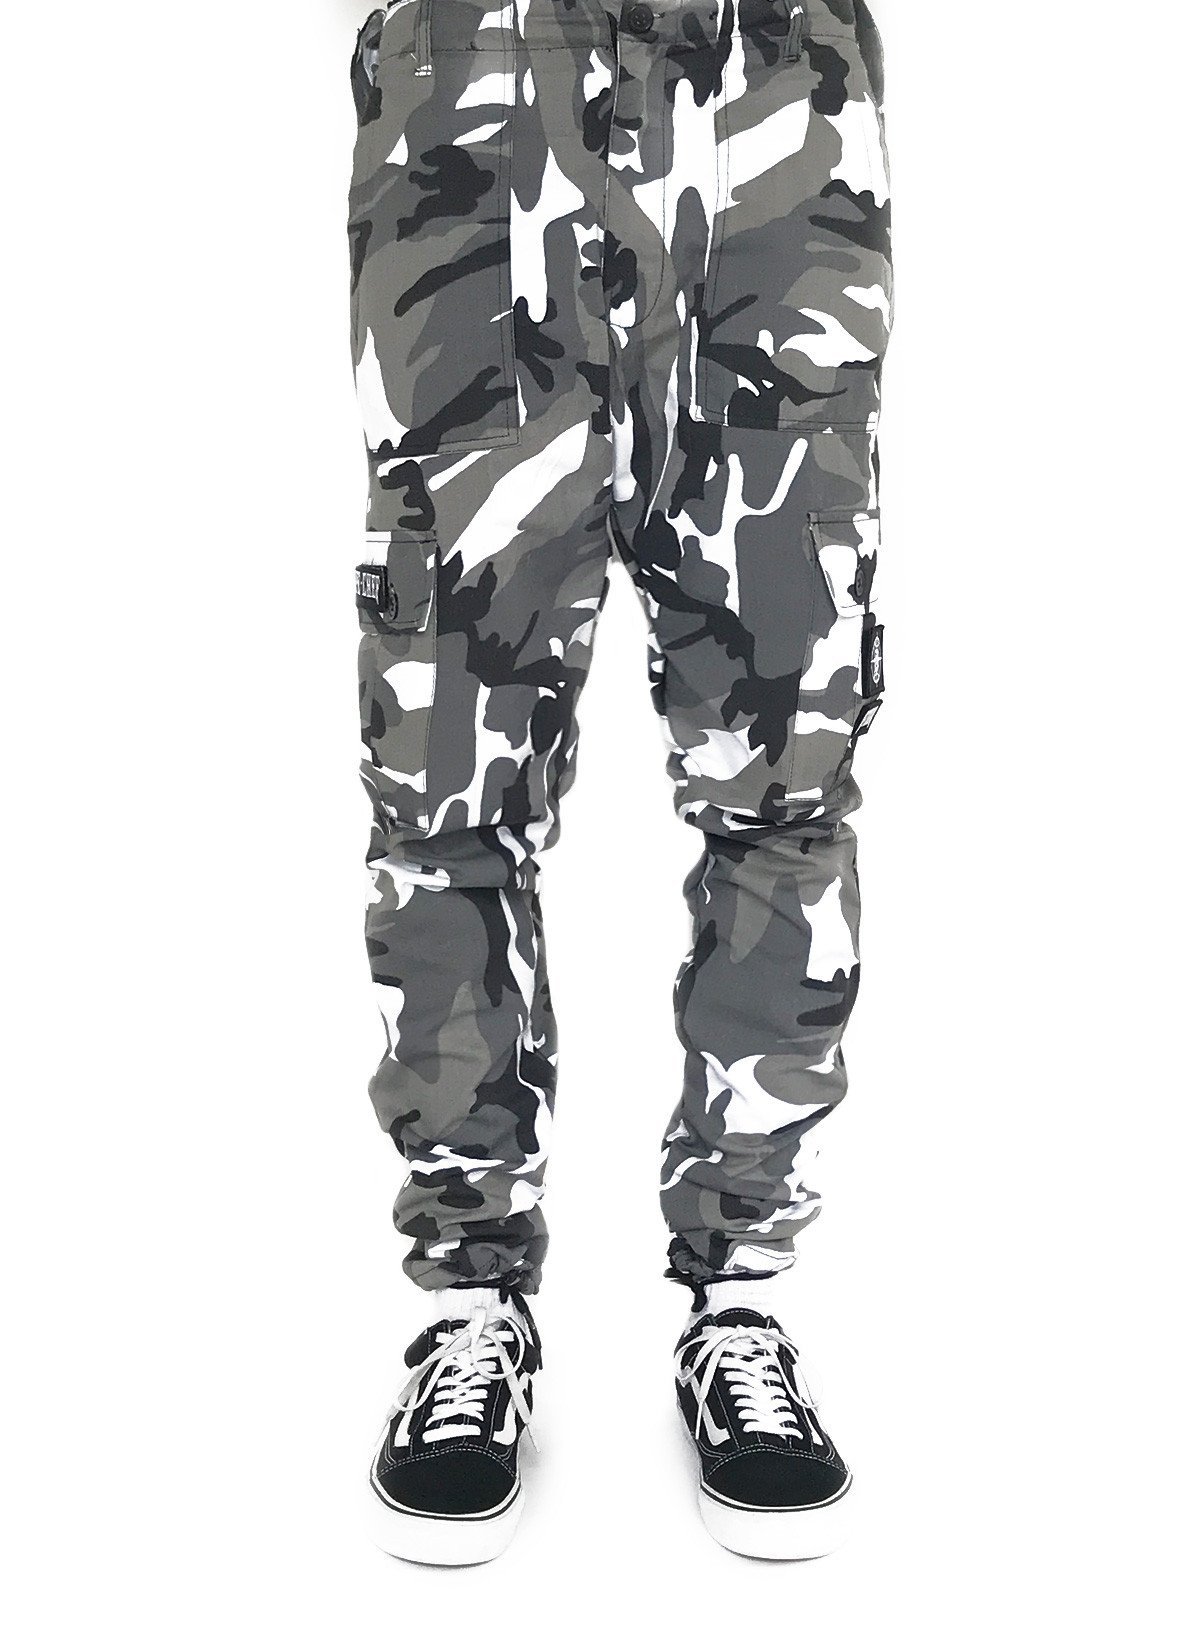 grey and white cargo pants